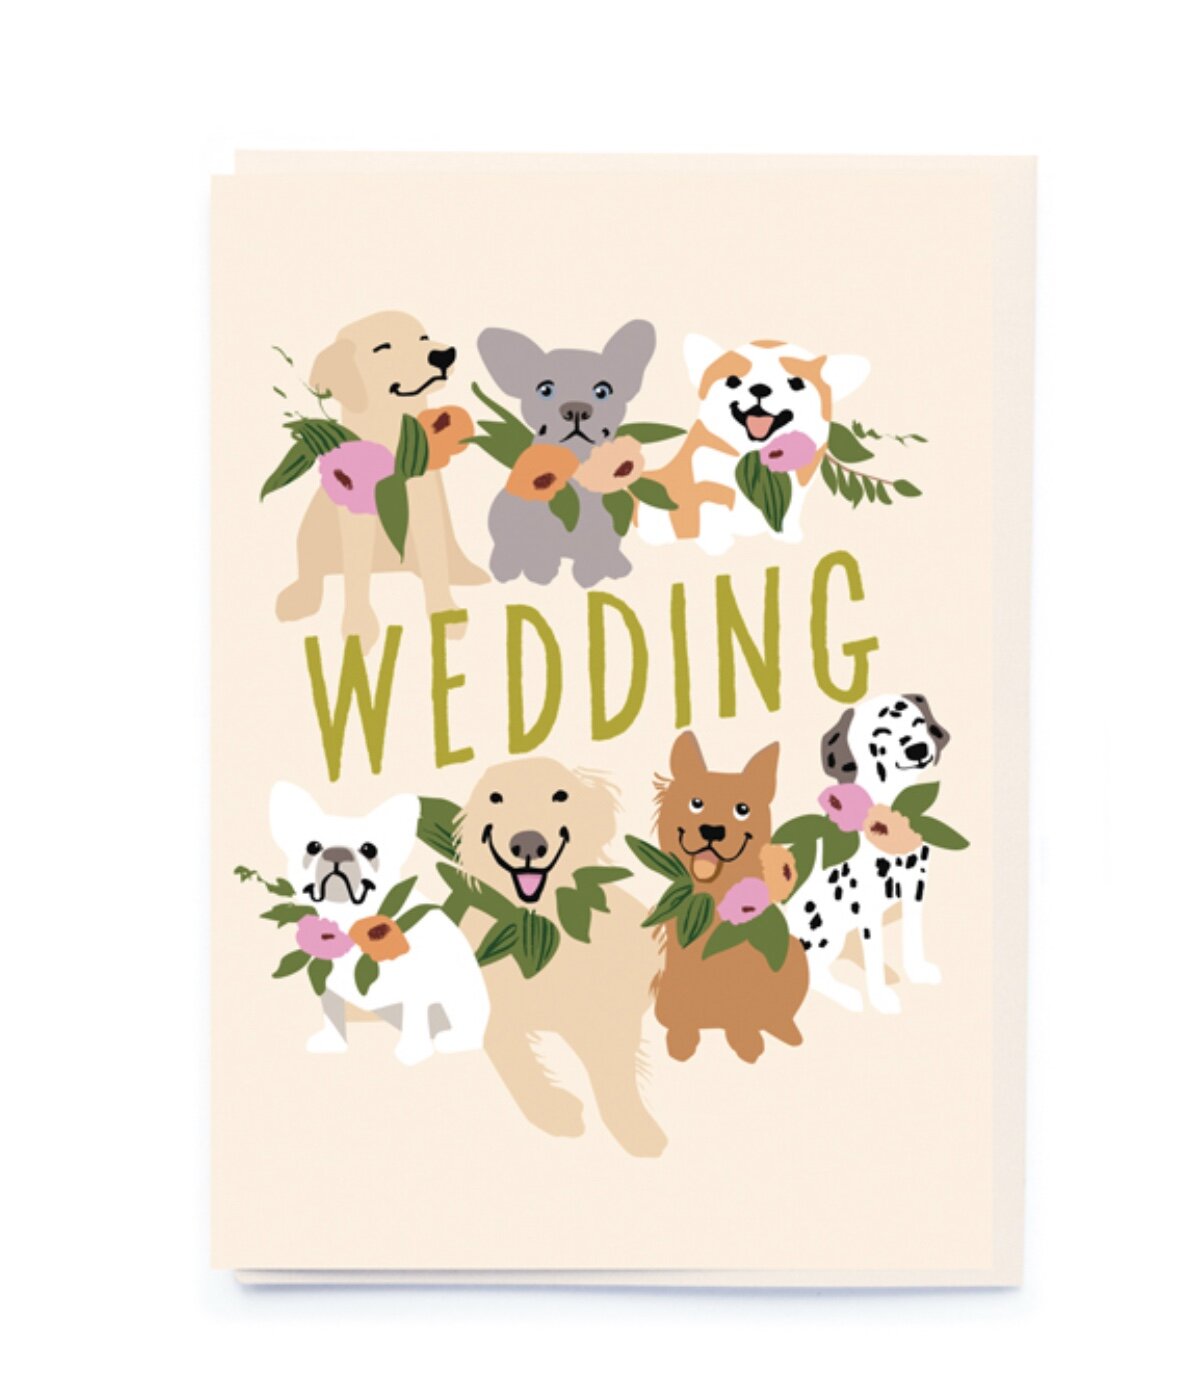 WEDDING (DOGS)  | CARD BY NOI